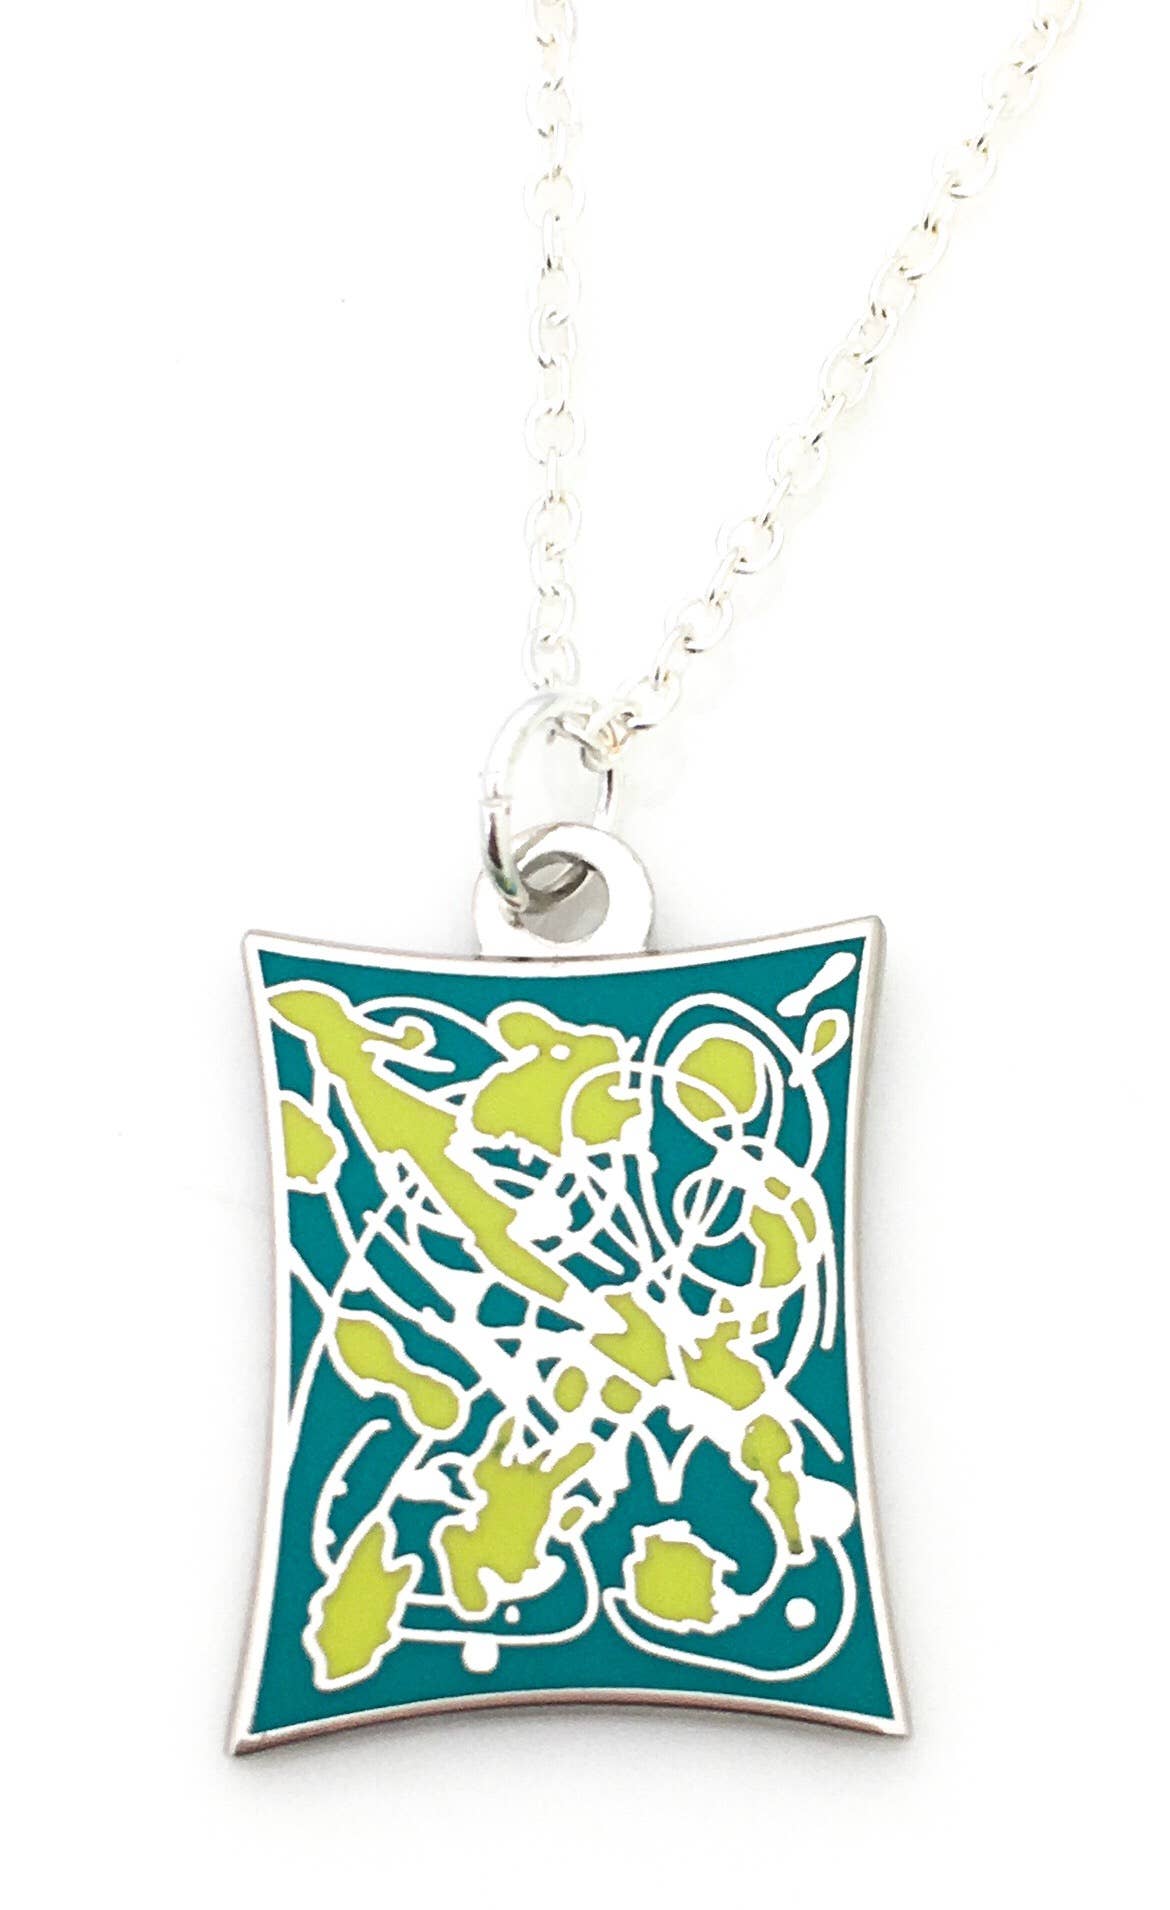 Necklace with a splatter design in blue